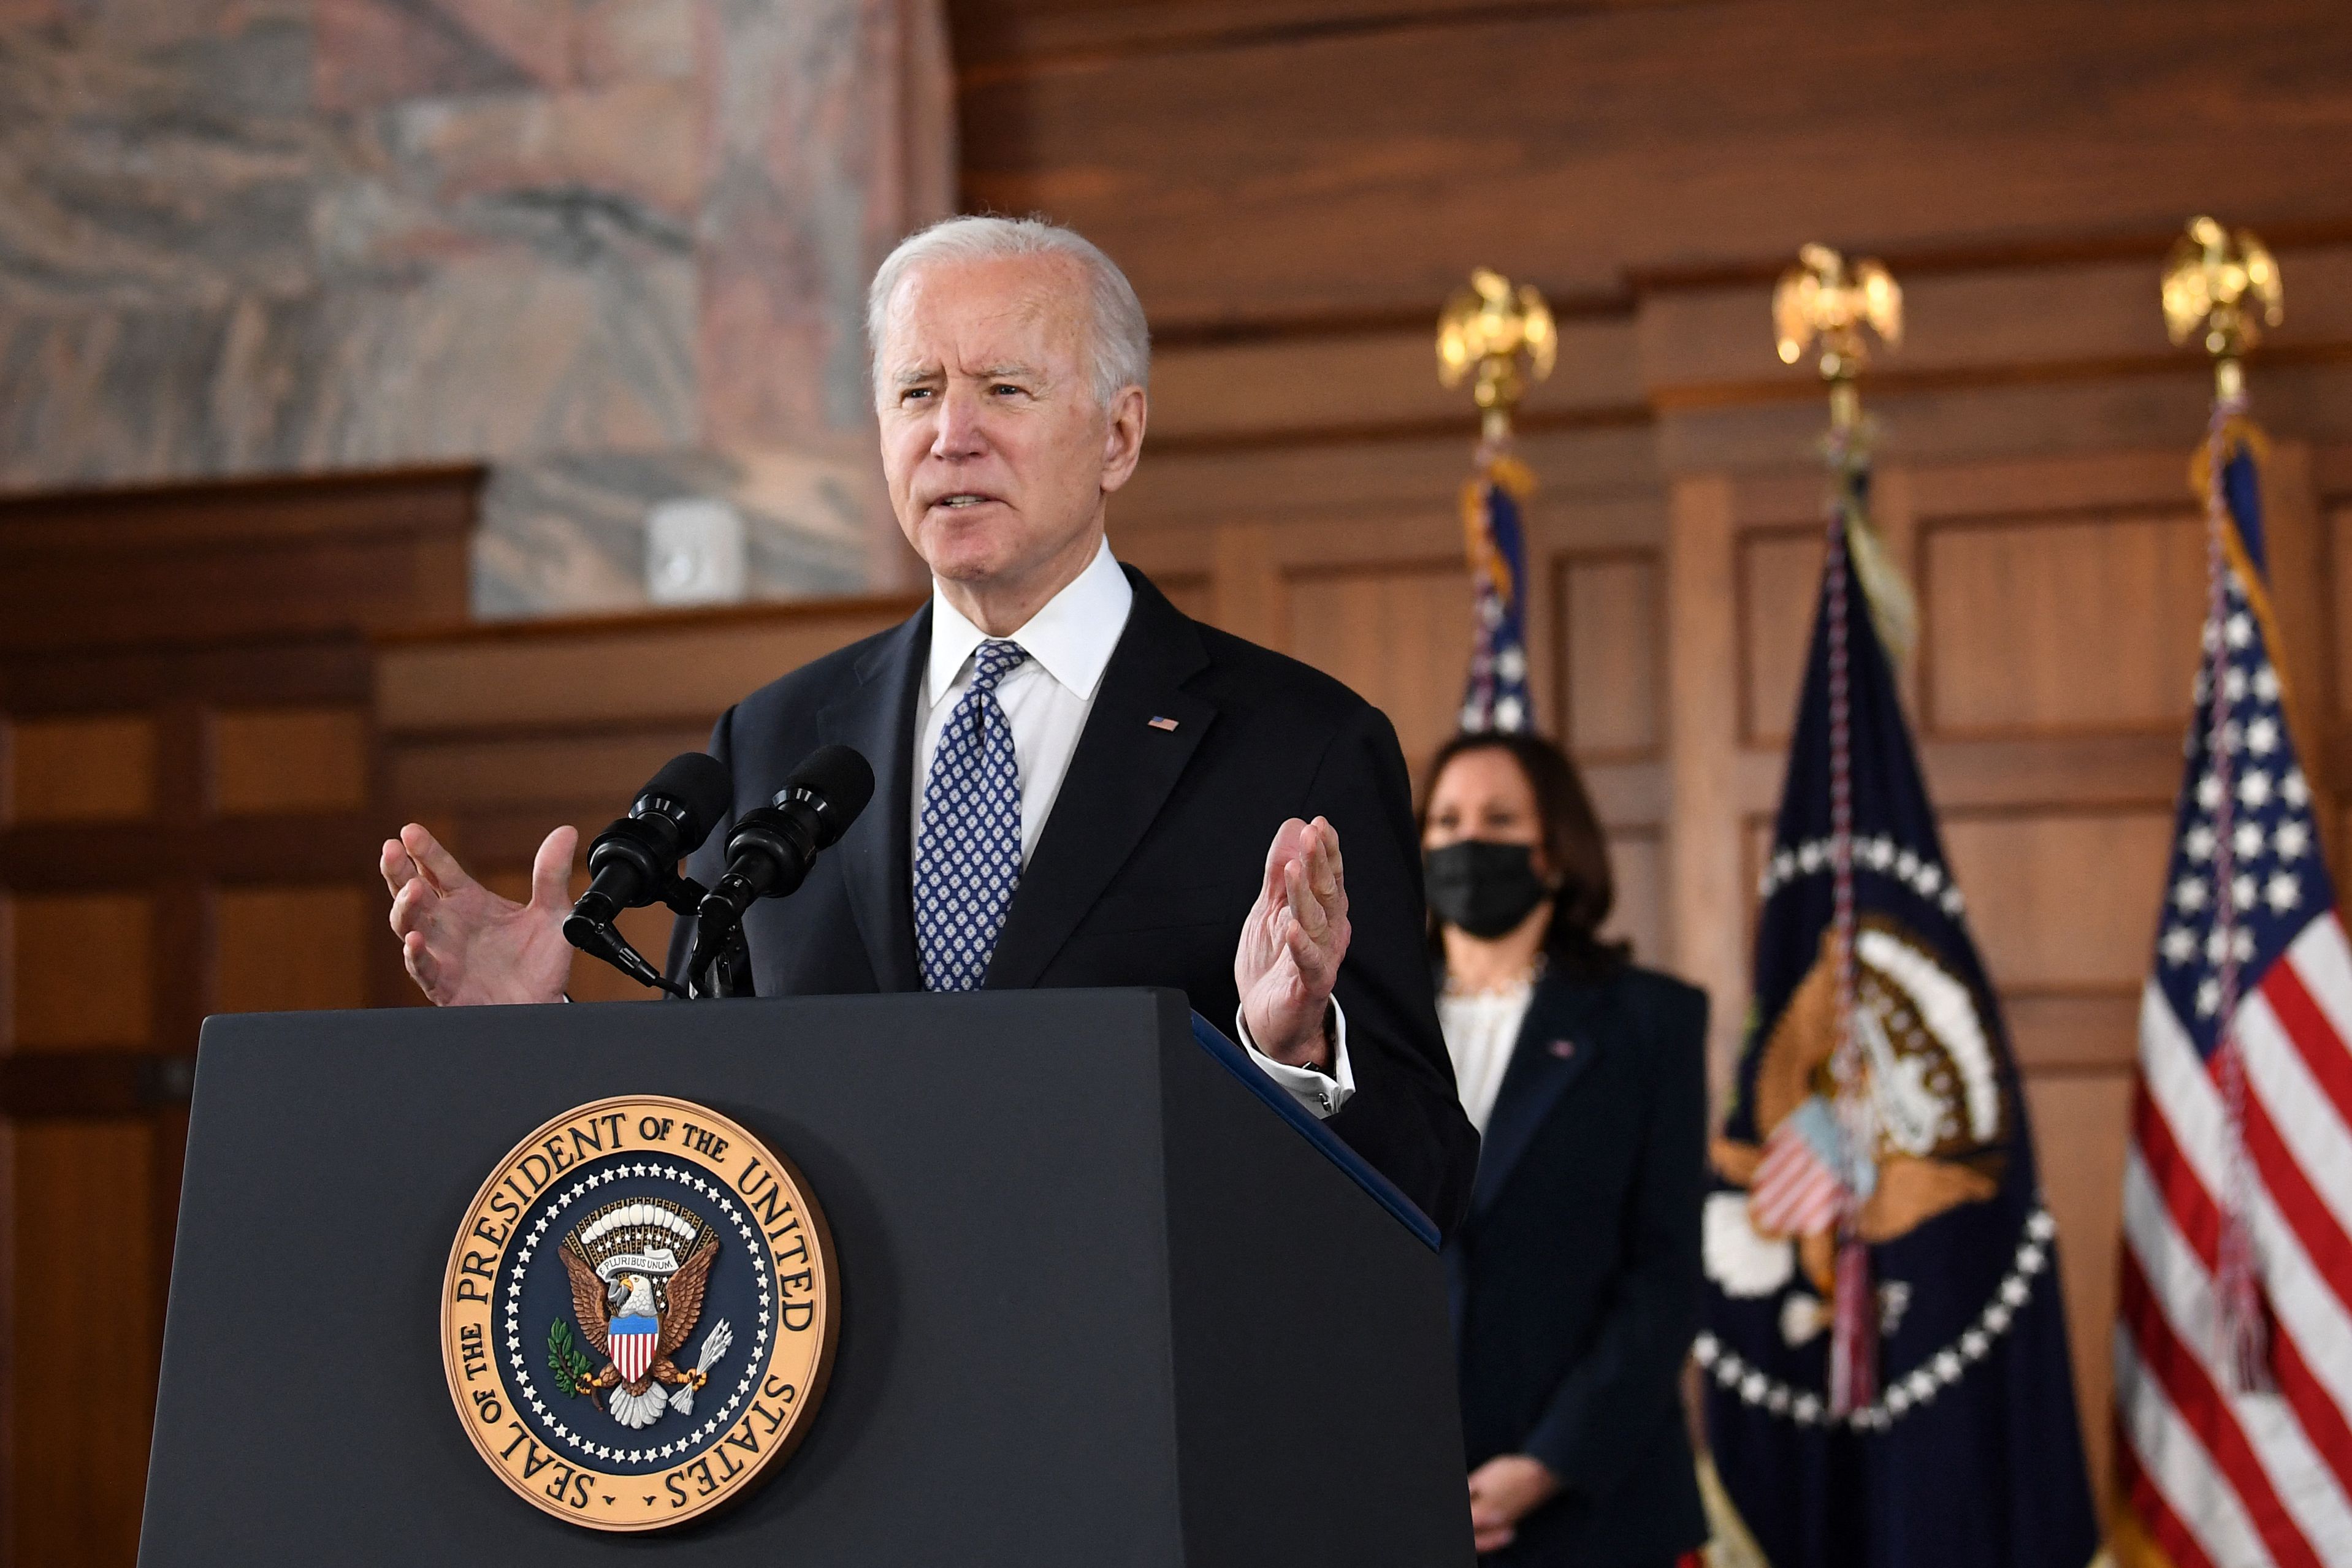 Biden, in a dark suit and blue tie, speaks at a podium bearing the seal of the US. Vice President Kamala Harris stands behind him, in a black suit and white blouse.